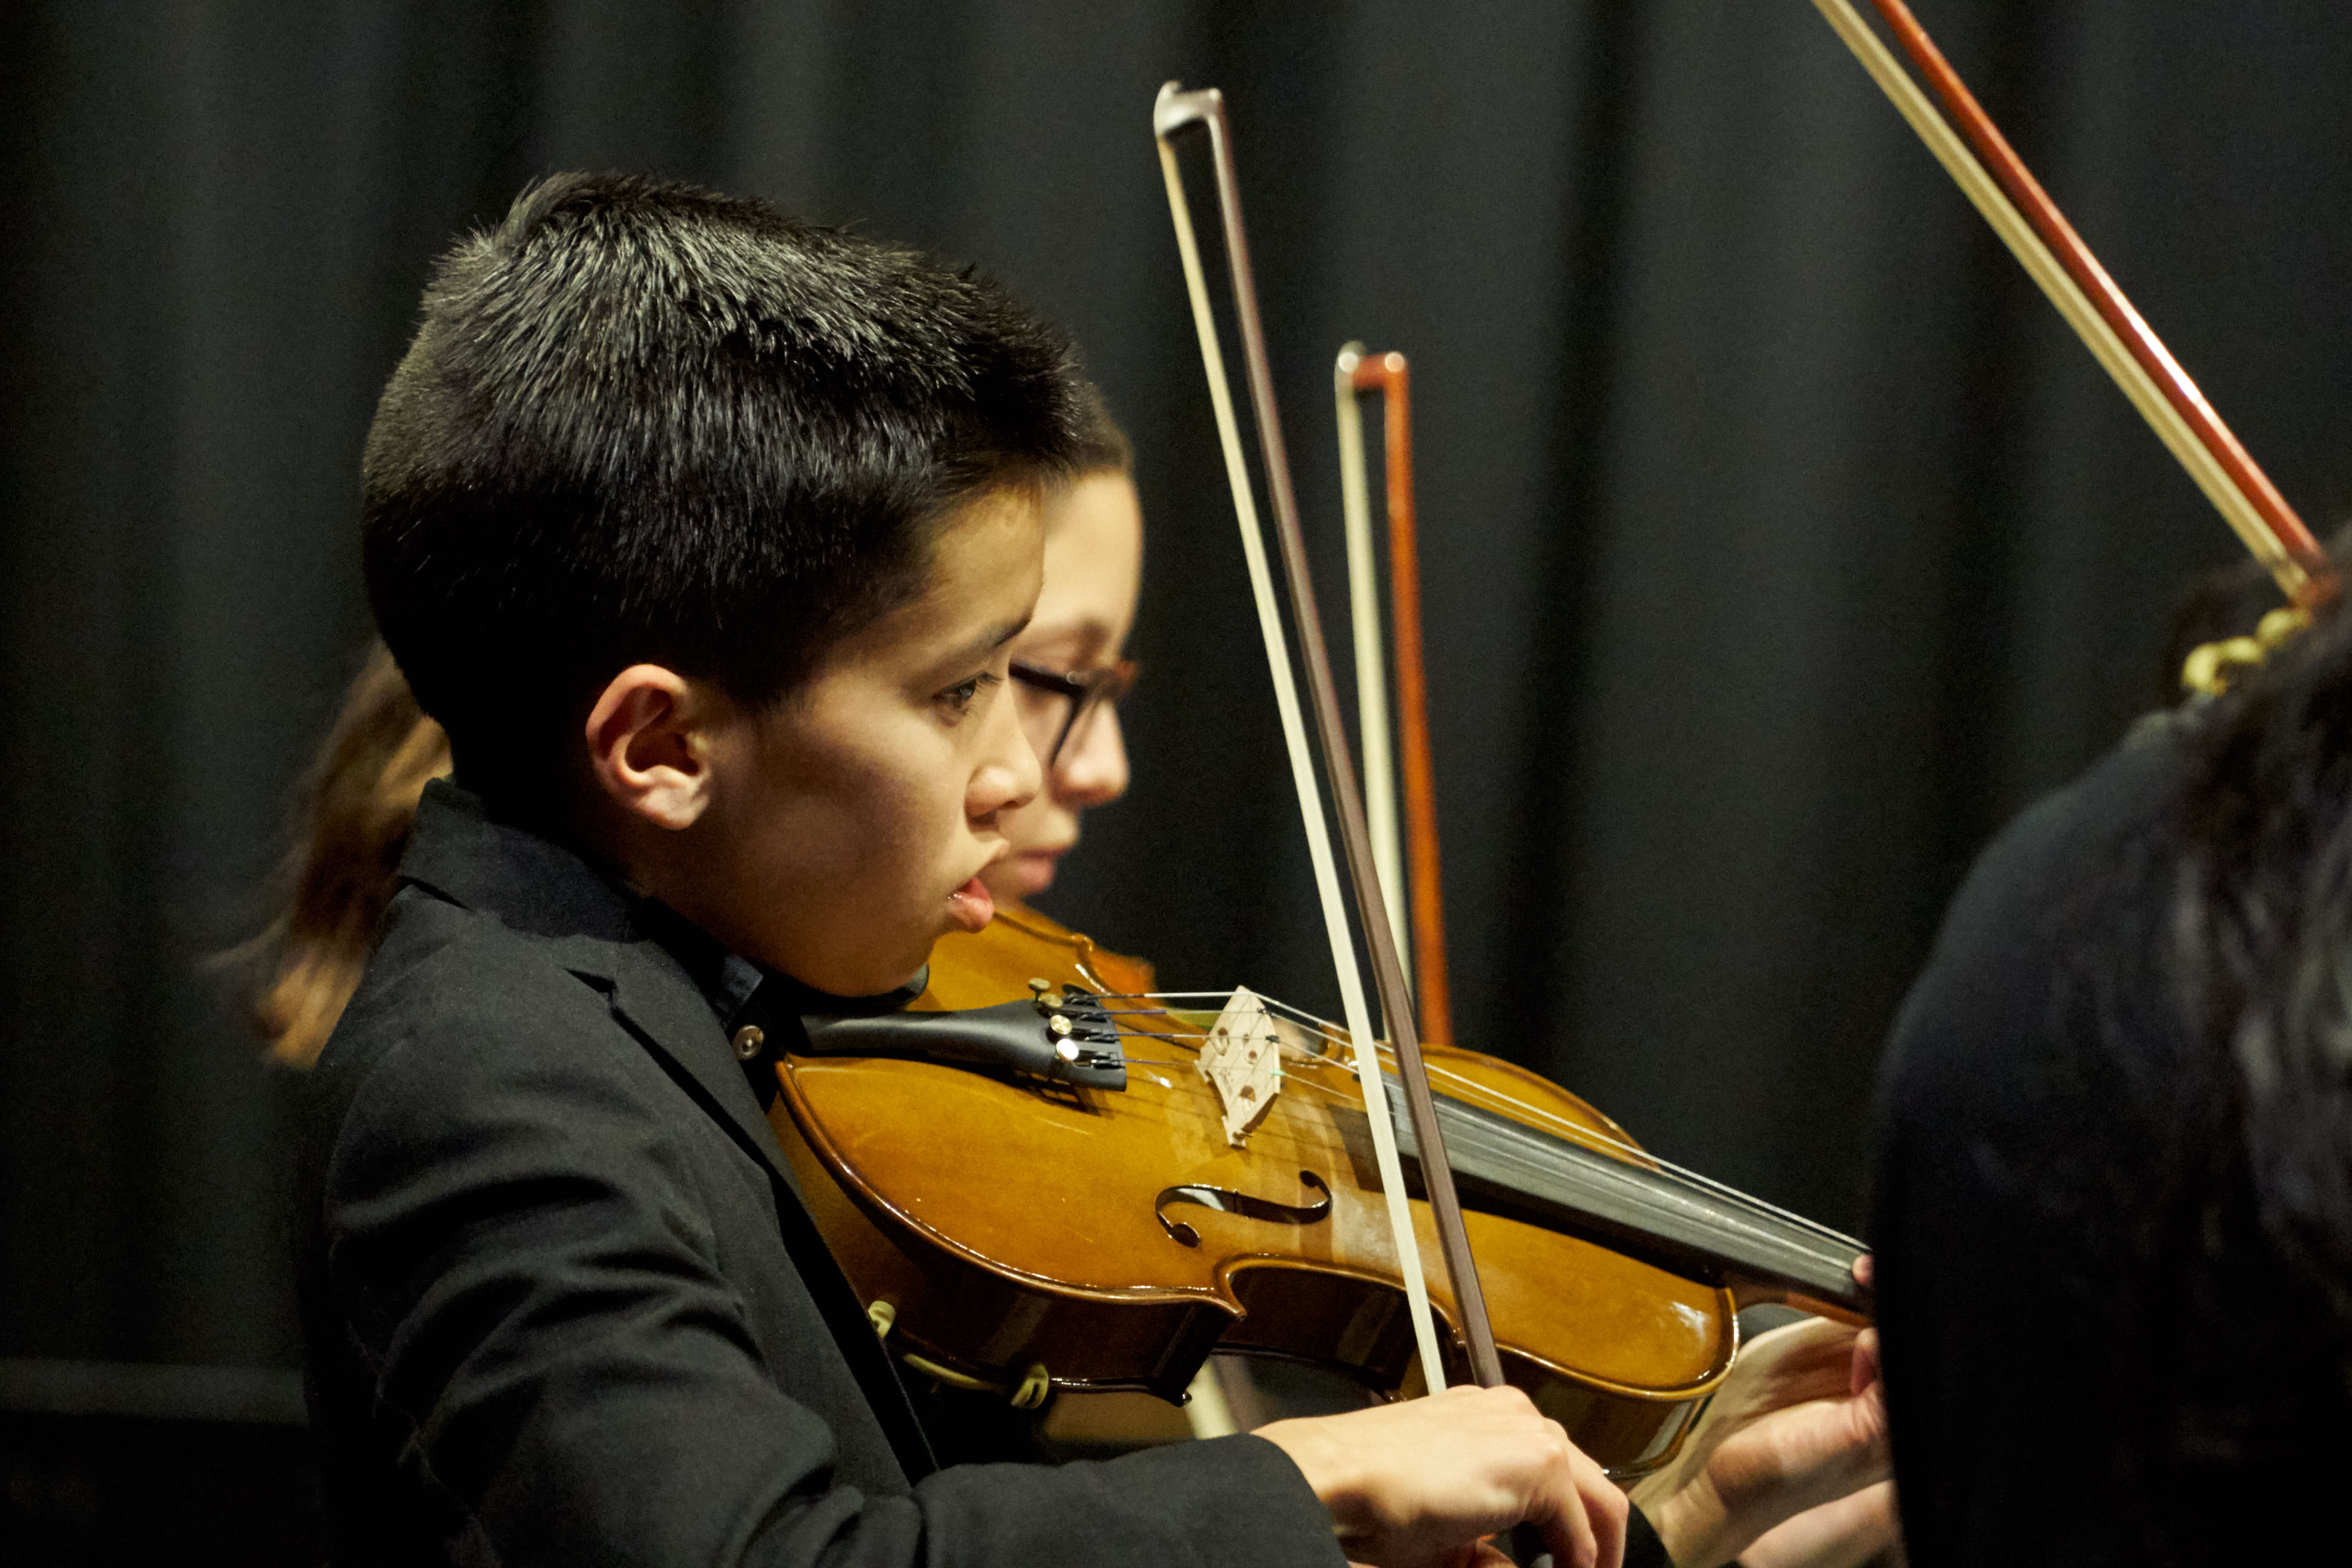 Middle School Orchestra to perform at Crouse Hinds Theater